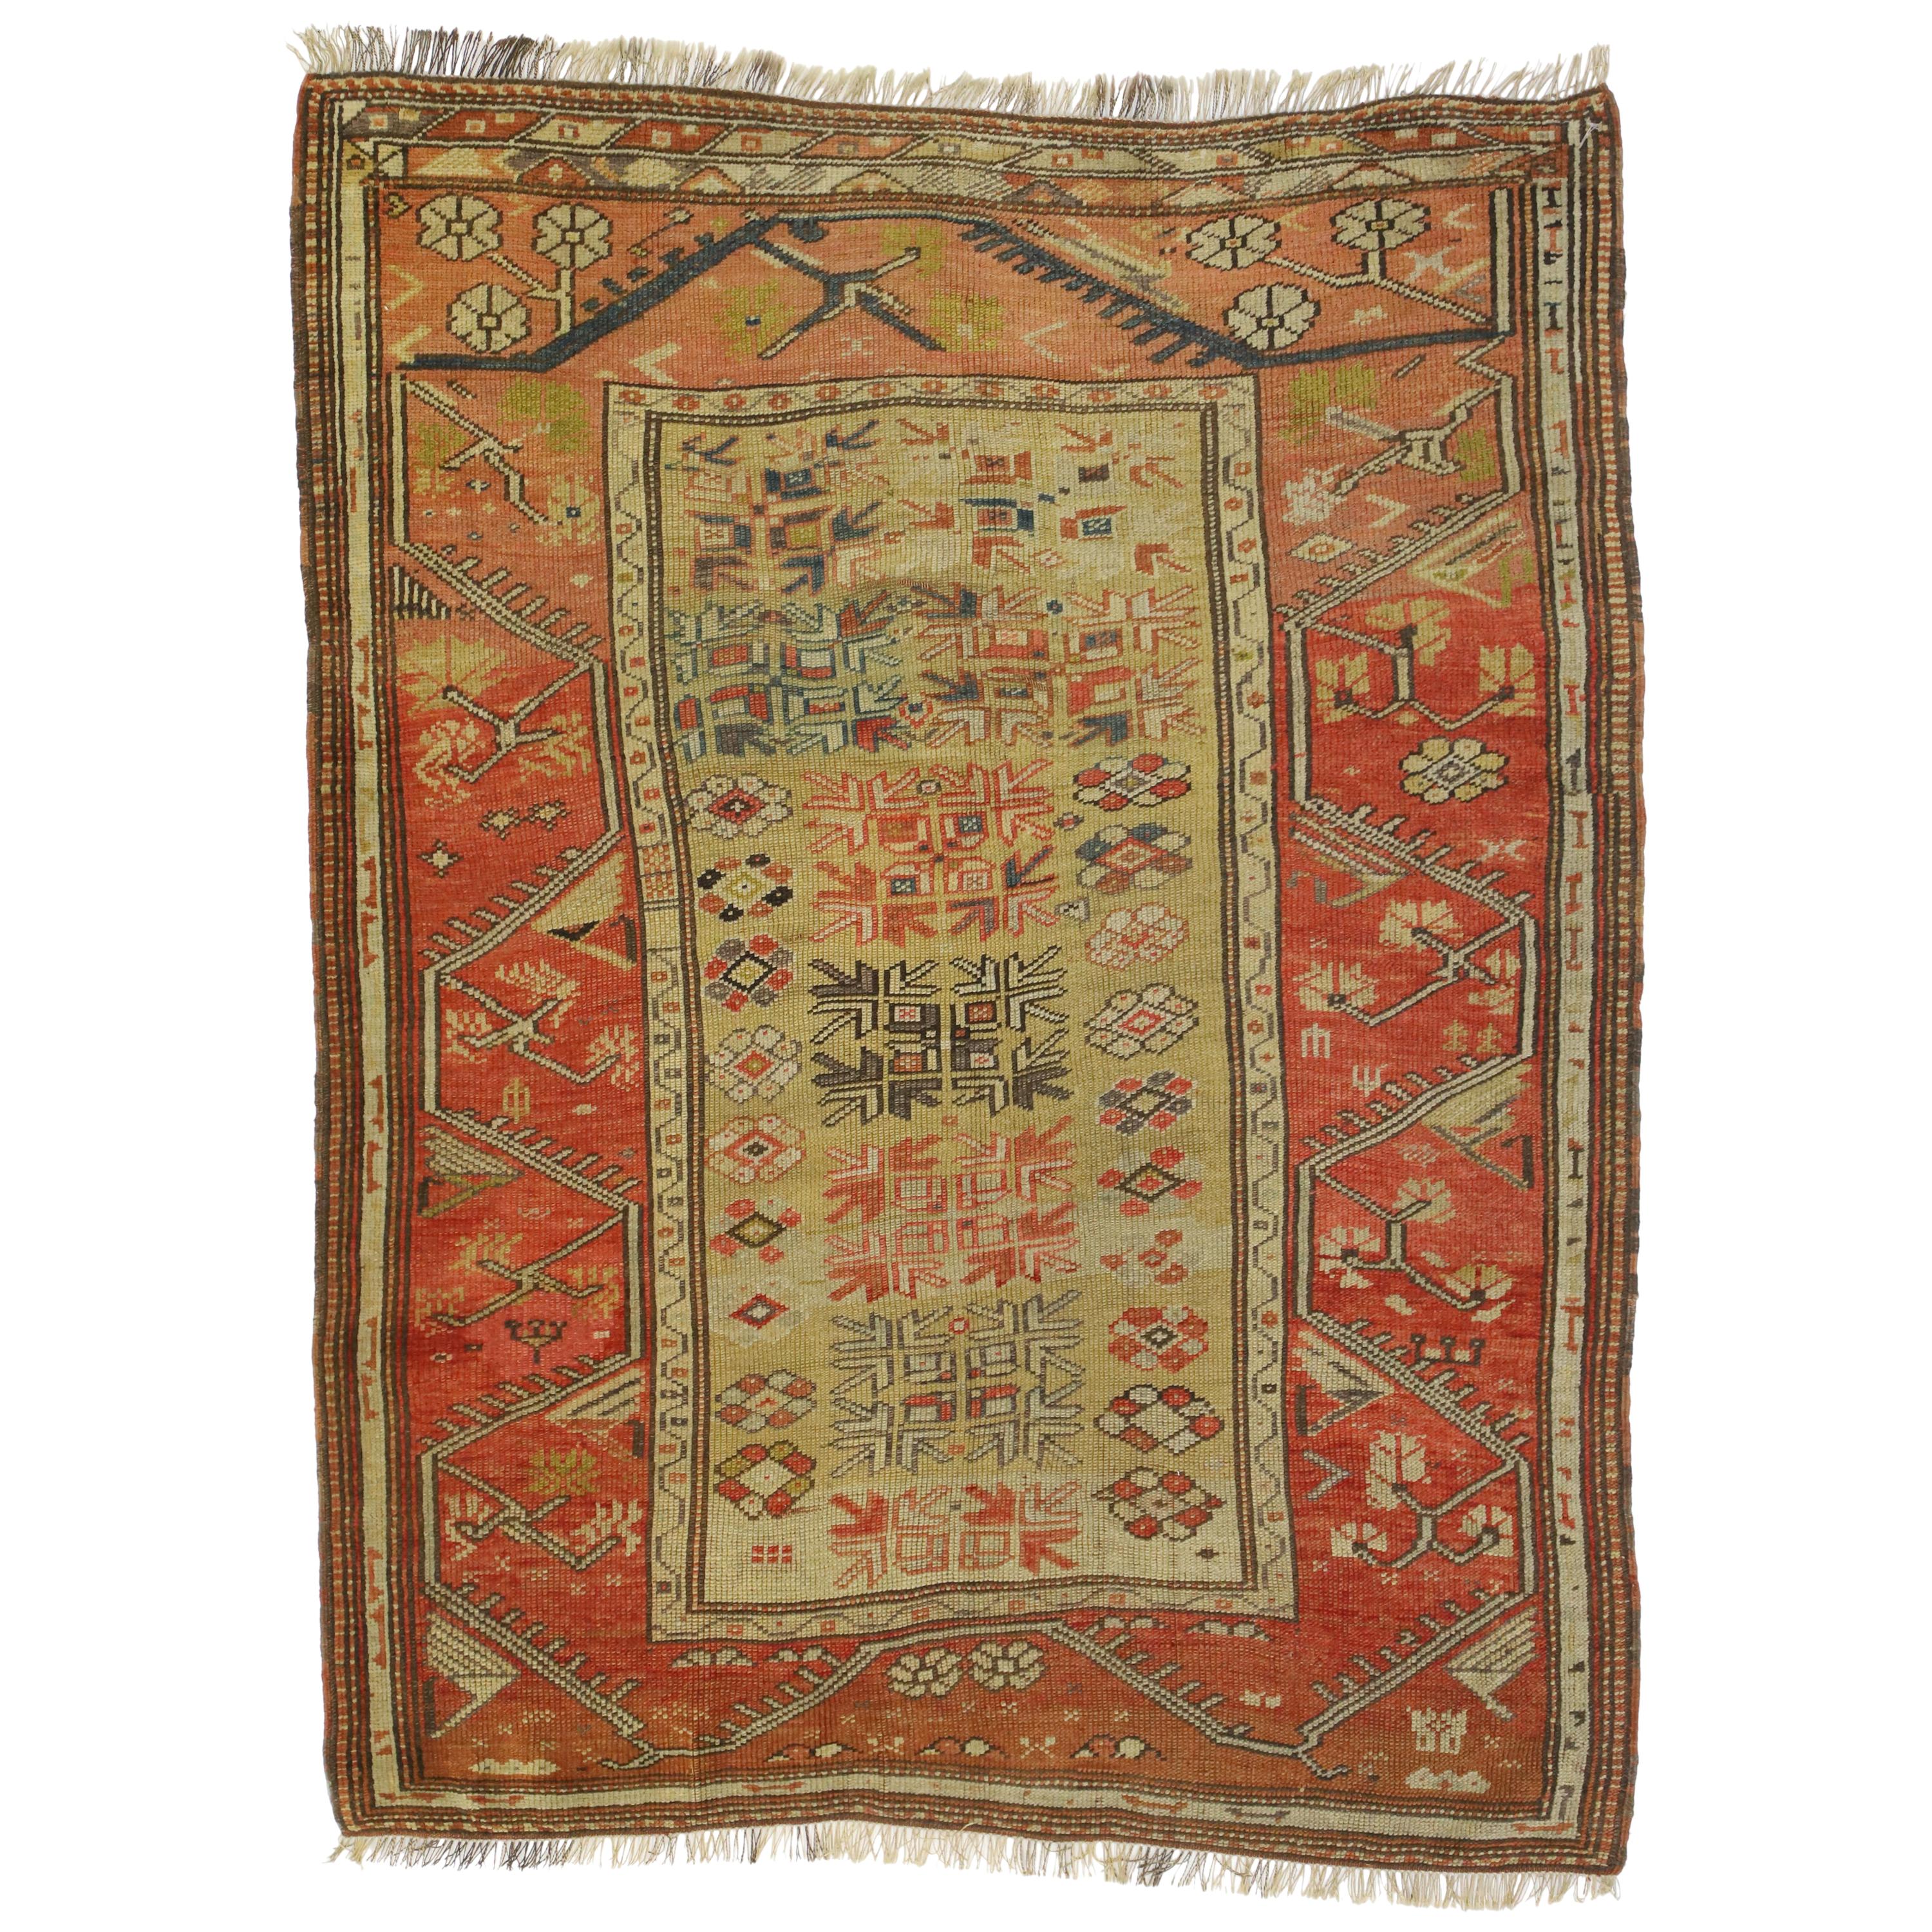 Distressed Antique Turkish Oushak Accent Rug with Rustic Arts & Crafts Style